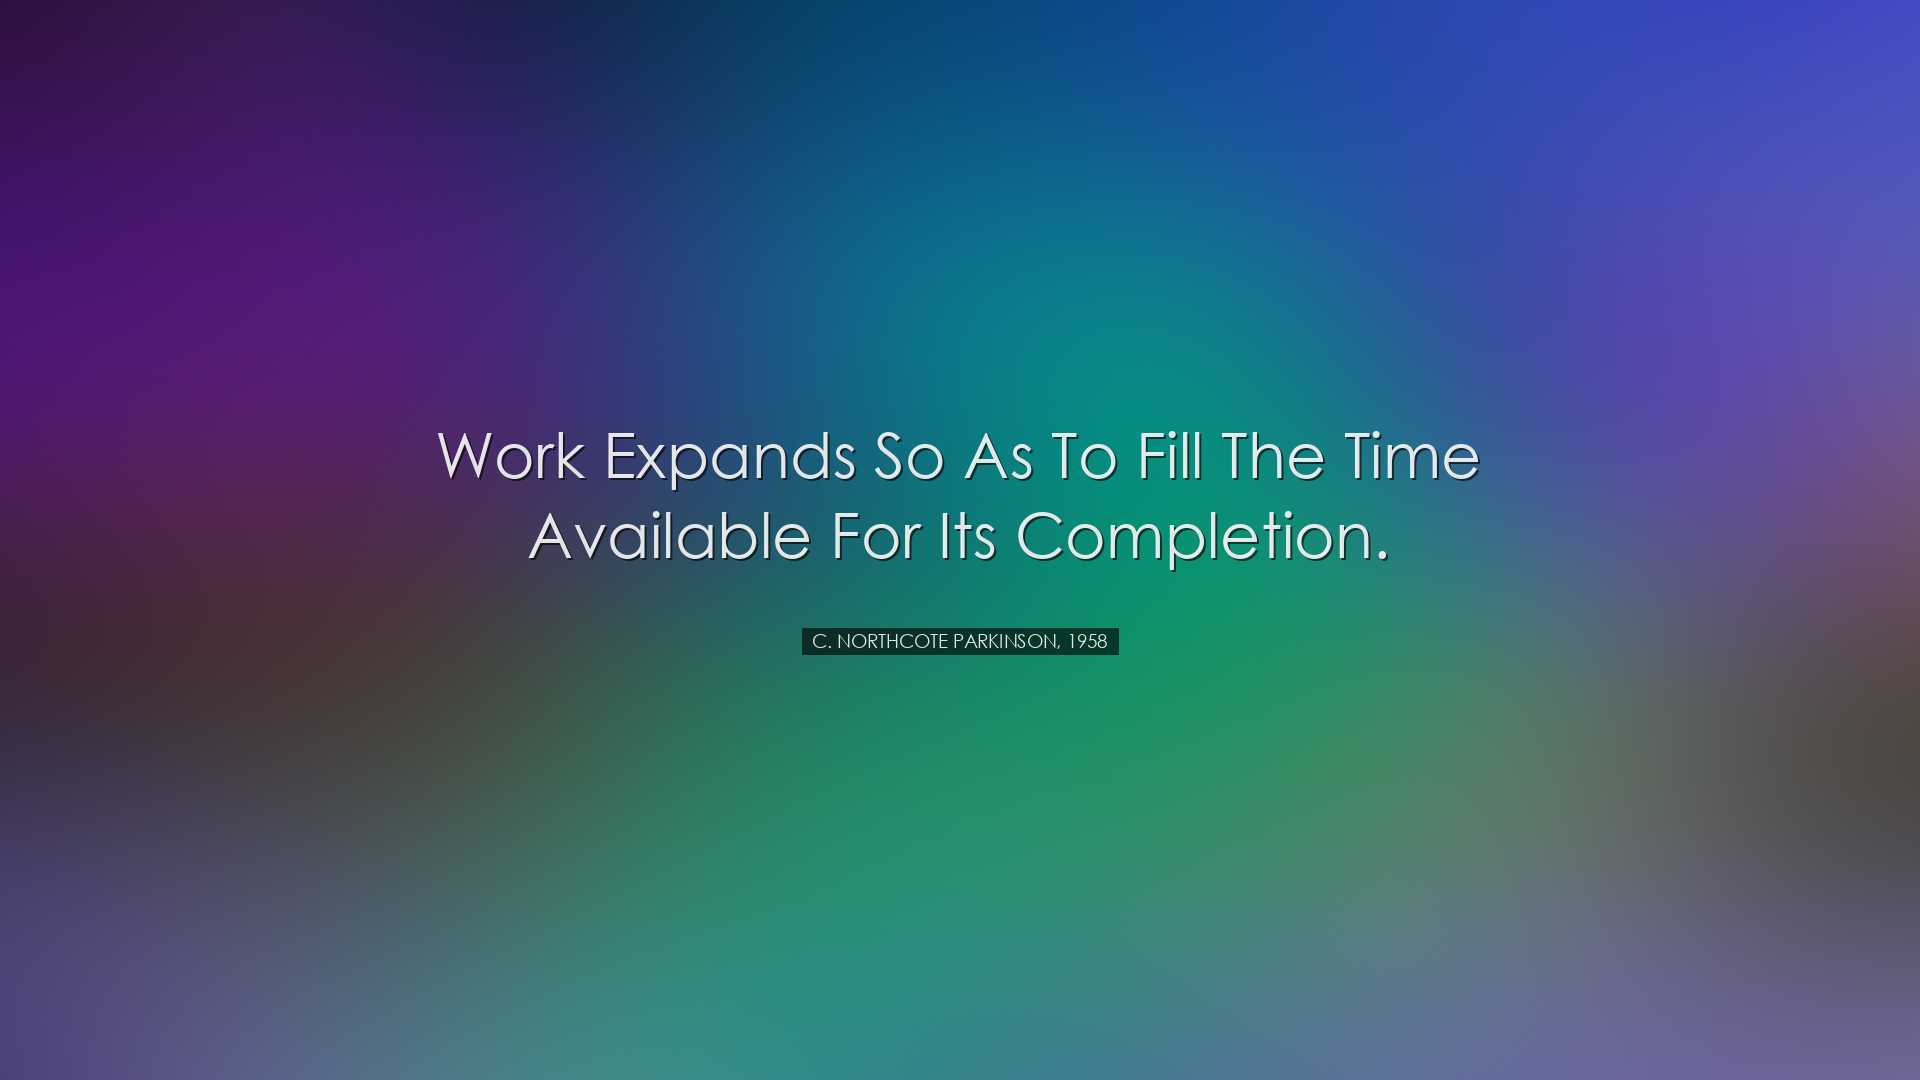 Work expands so as to fill the time available for its completion.